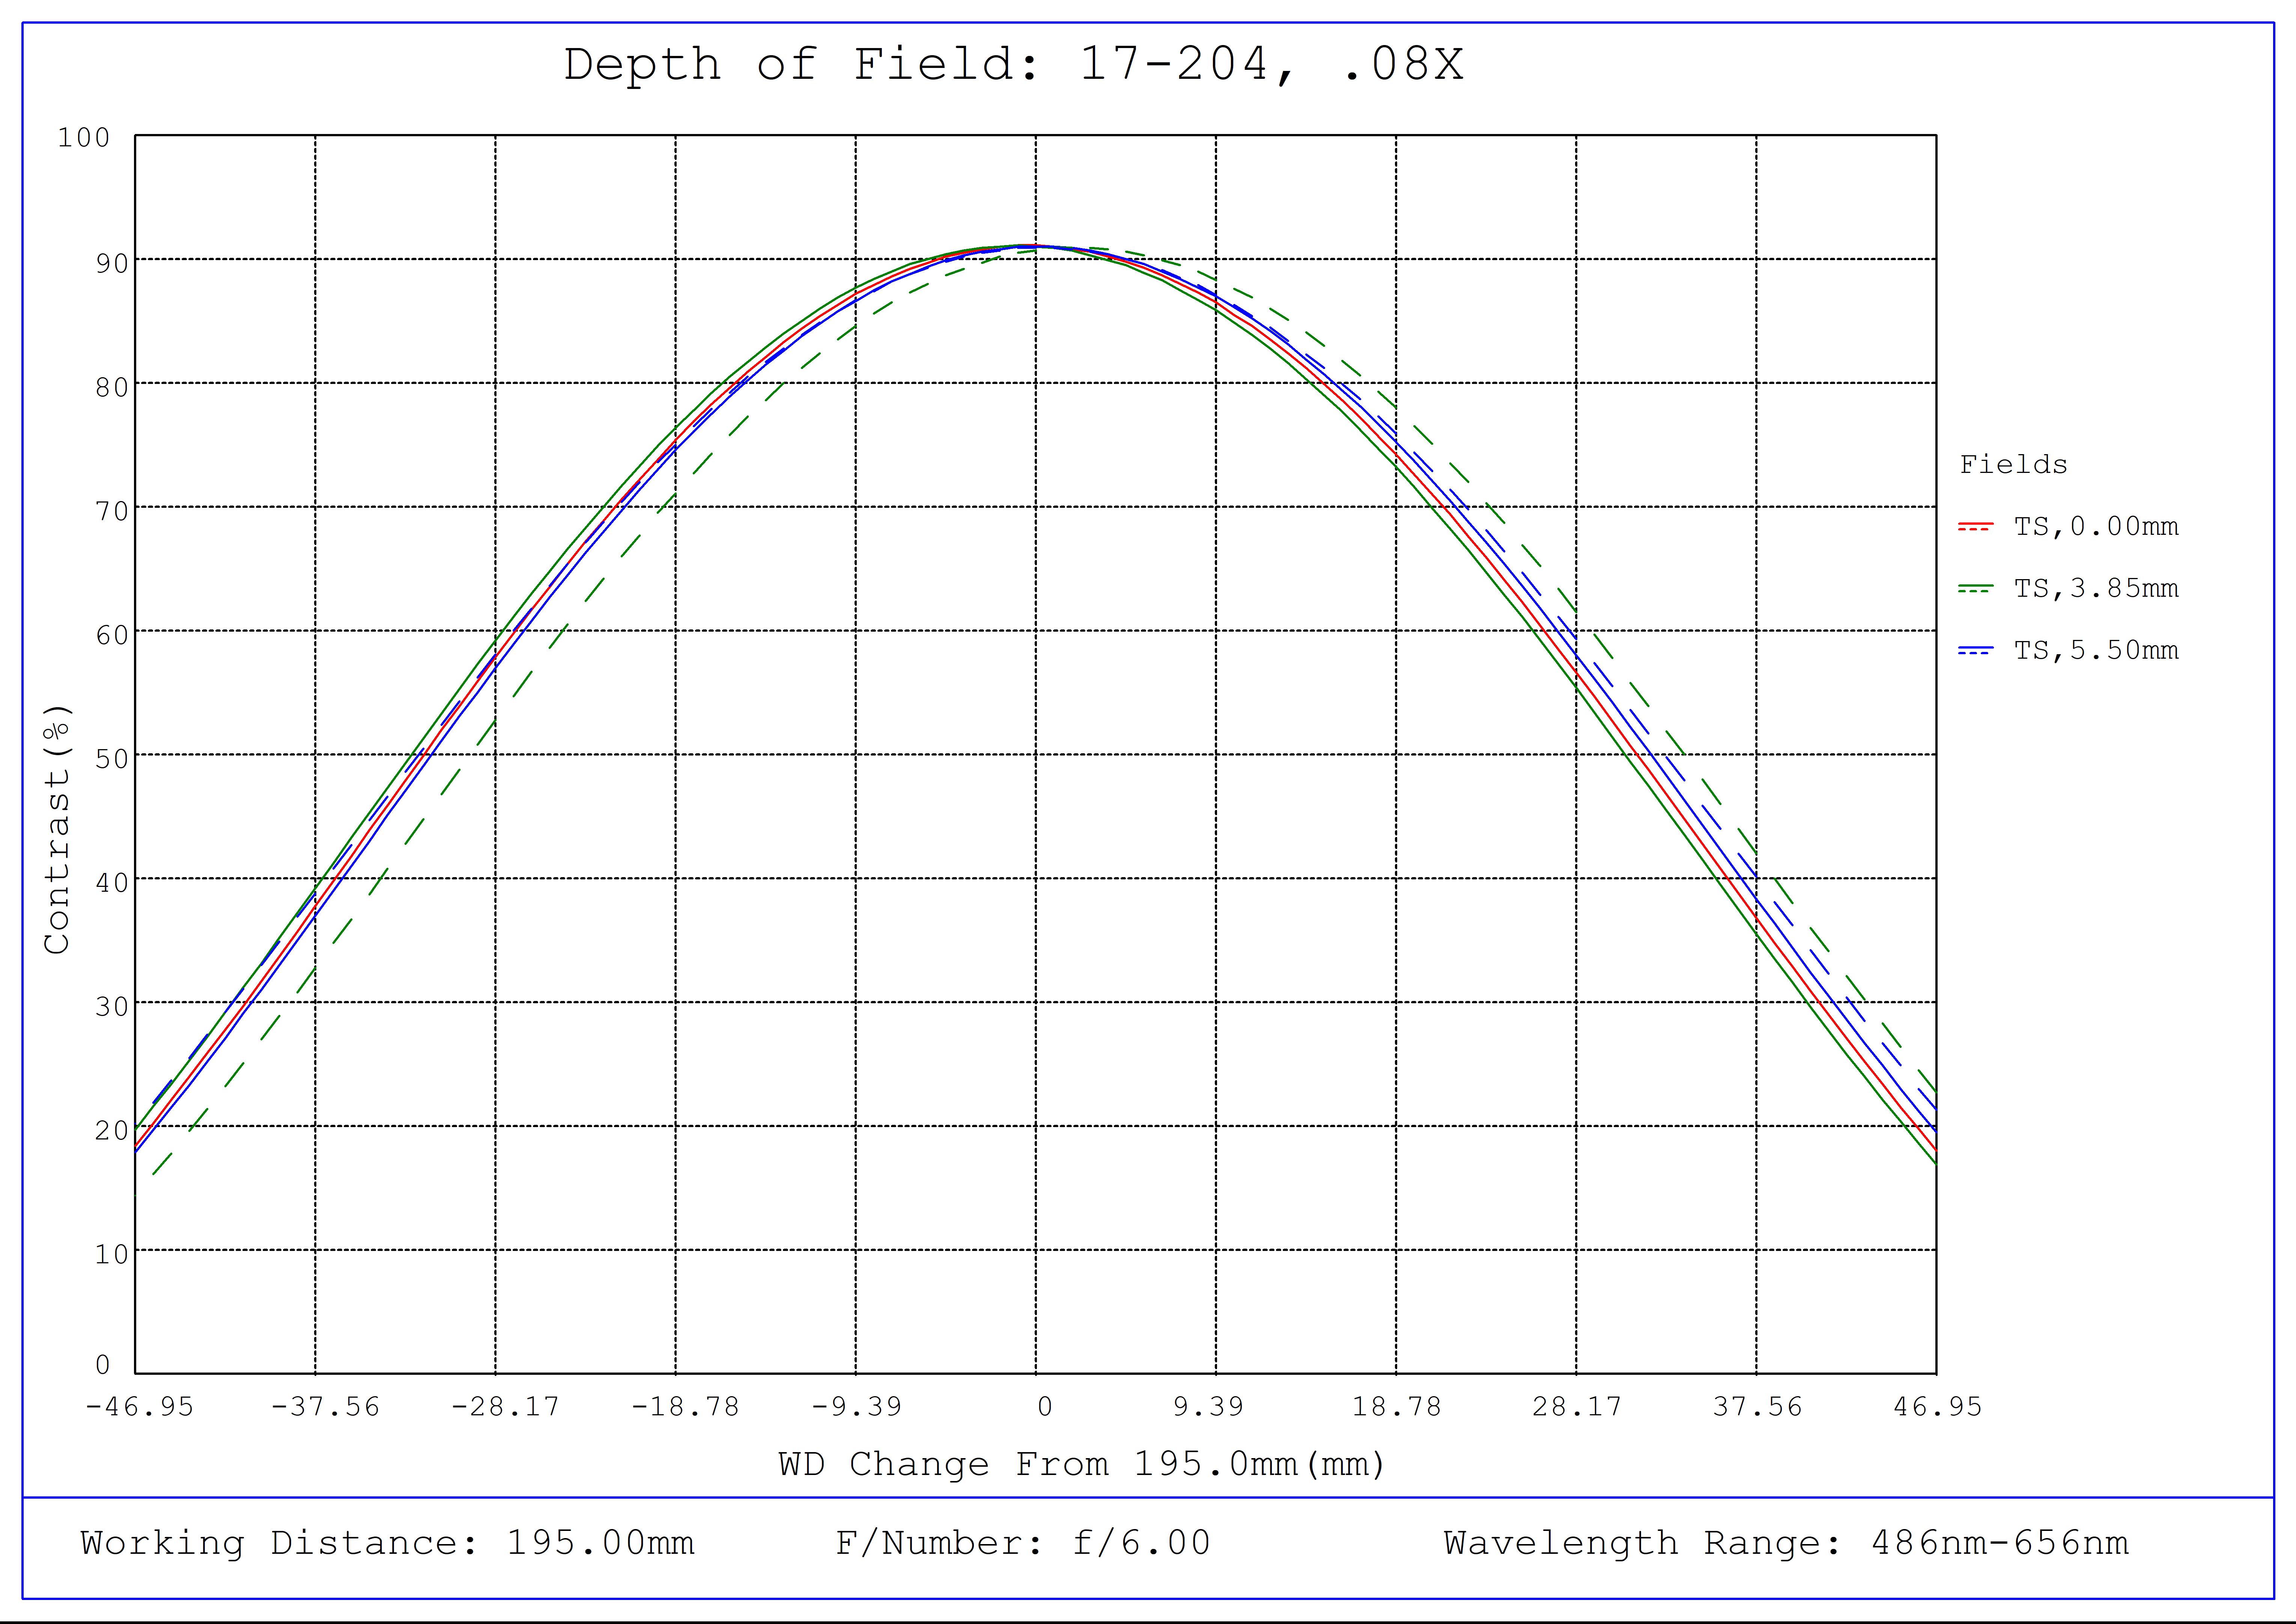 #17-204, 0.08X GoldTL™ Telecentric Lens (Mount Included), Depth of Field Plot, 195mm Working Distance, f6